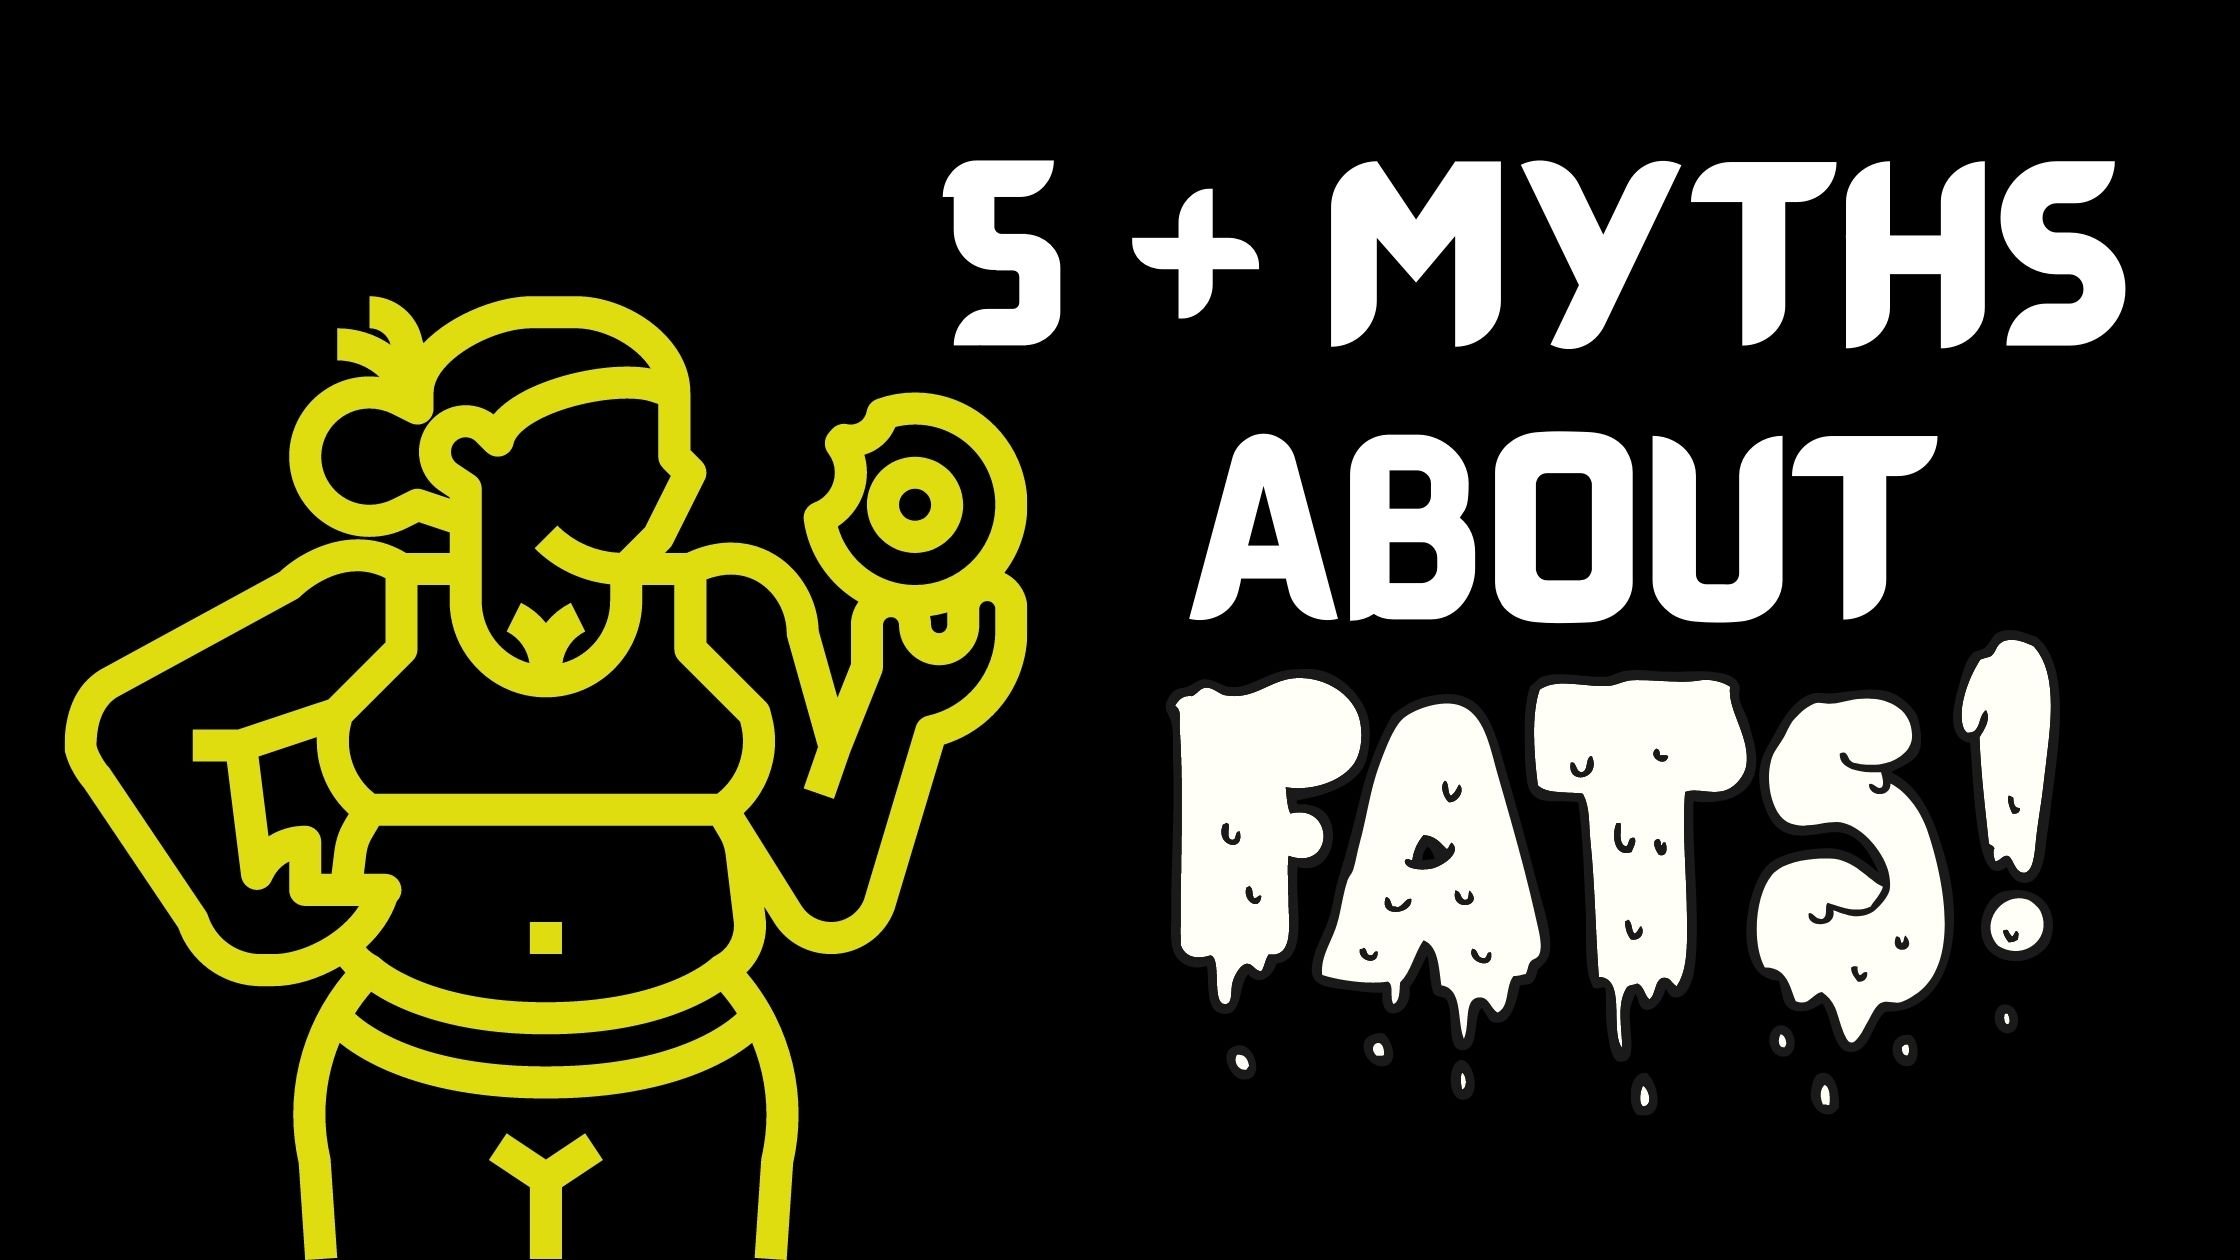 5 + Myths About Fats: You Must Be Knows If You Are In Fitness World.